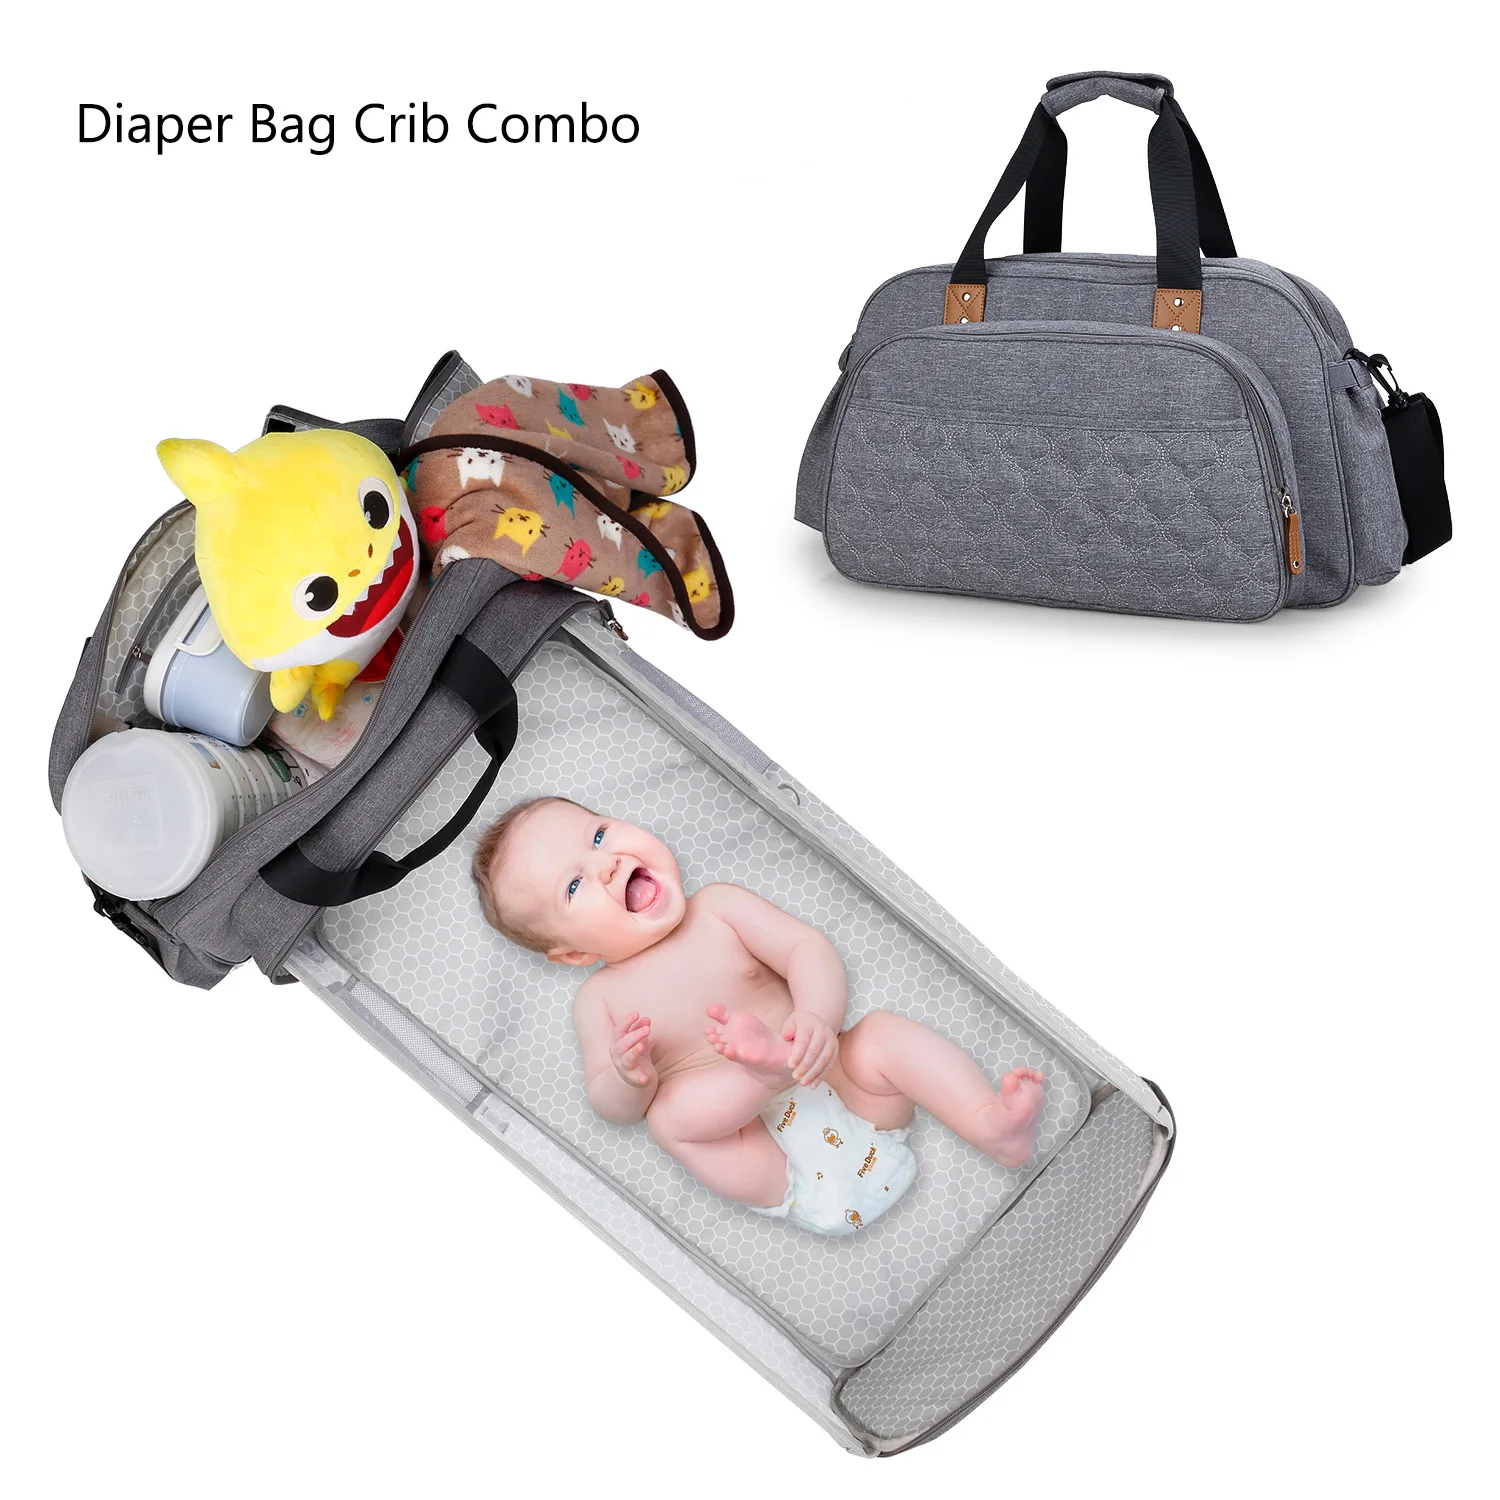 

Baby Nappy Changing Bags Changing Station Portable Baby Bed Travel Bassinet Folding Crib Waterproof Mummy bag Diaper Bag